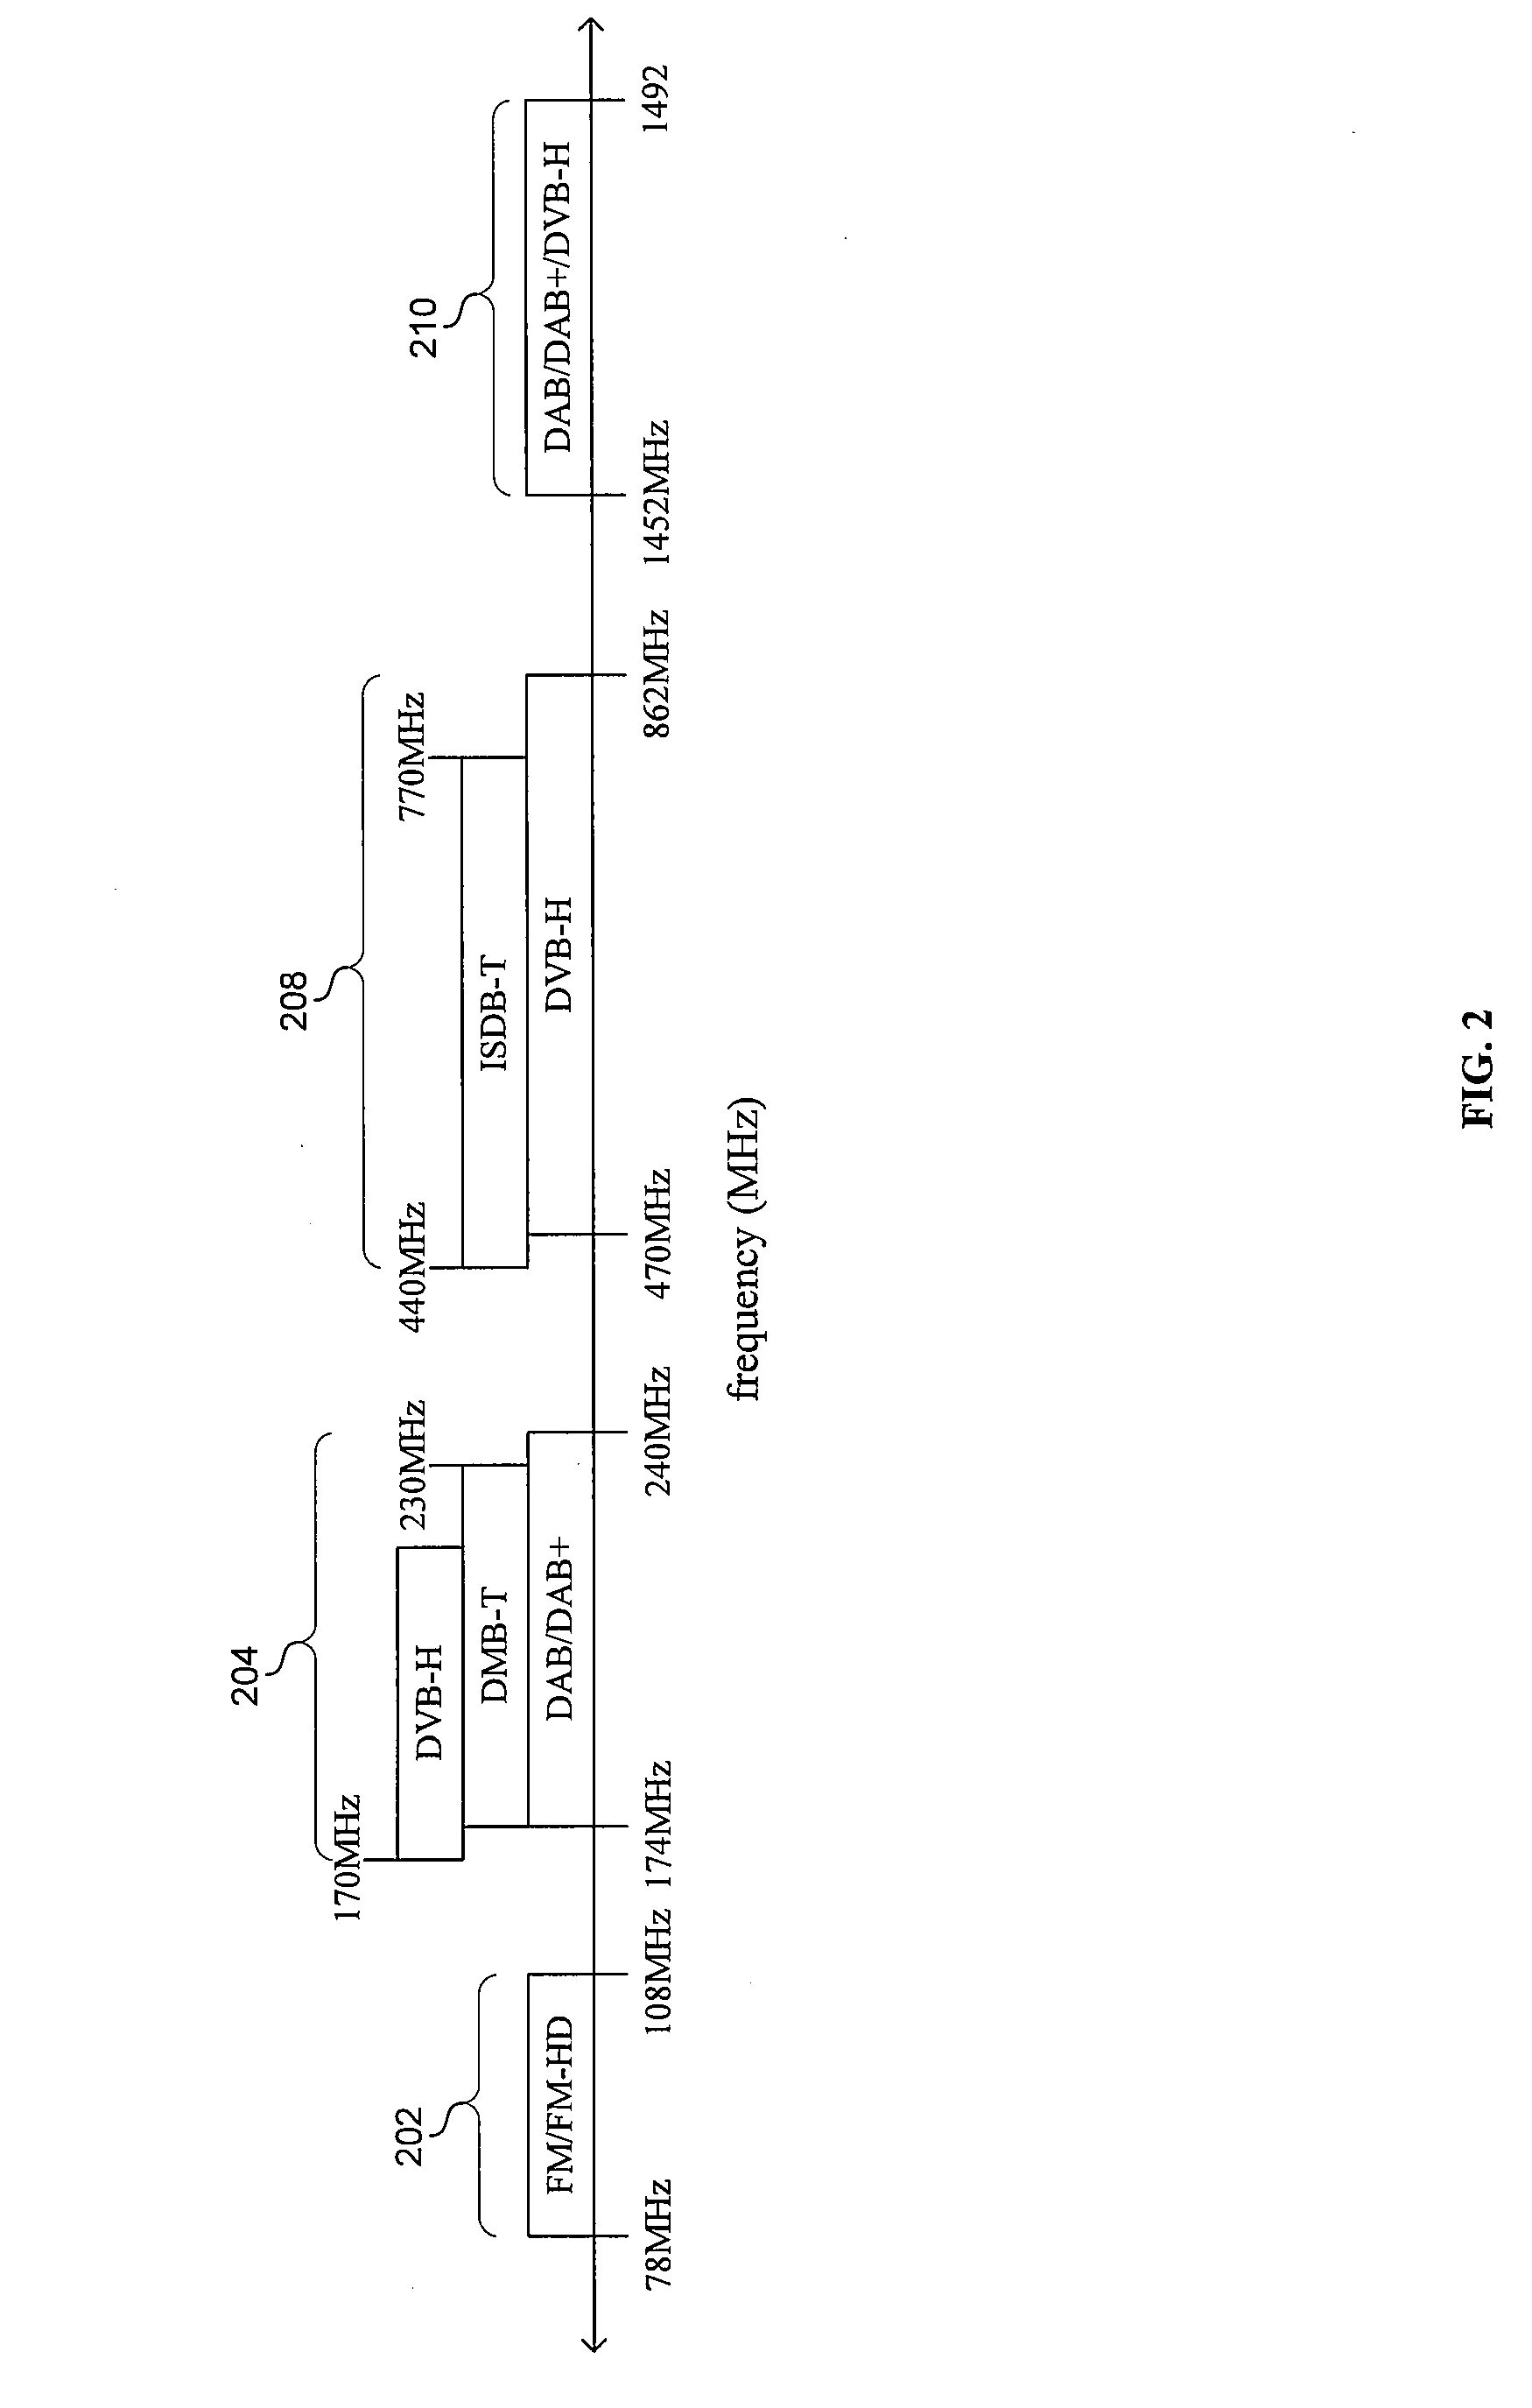 Method and system for an integrated multi-standard audio/video receiver